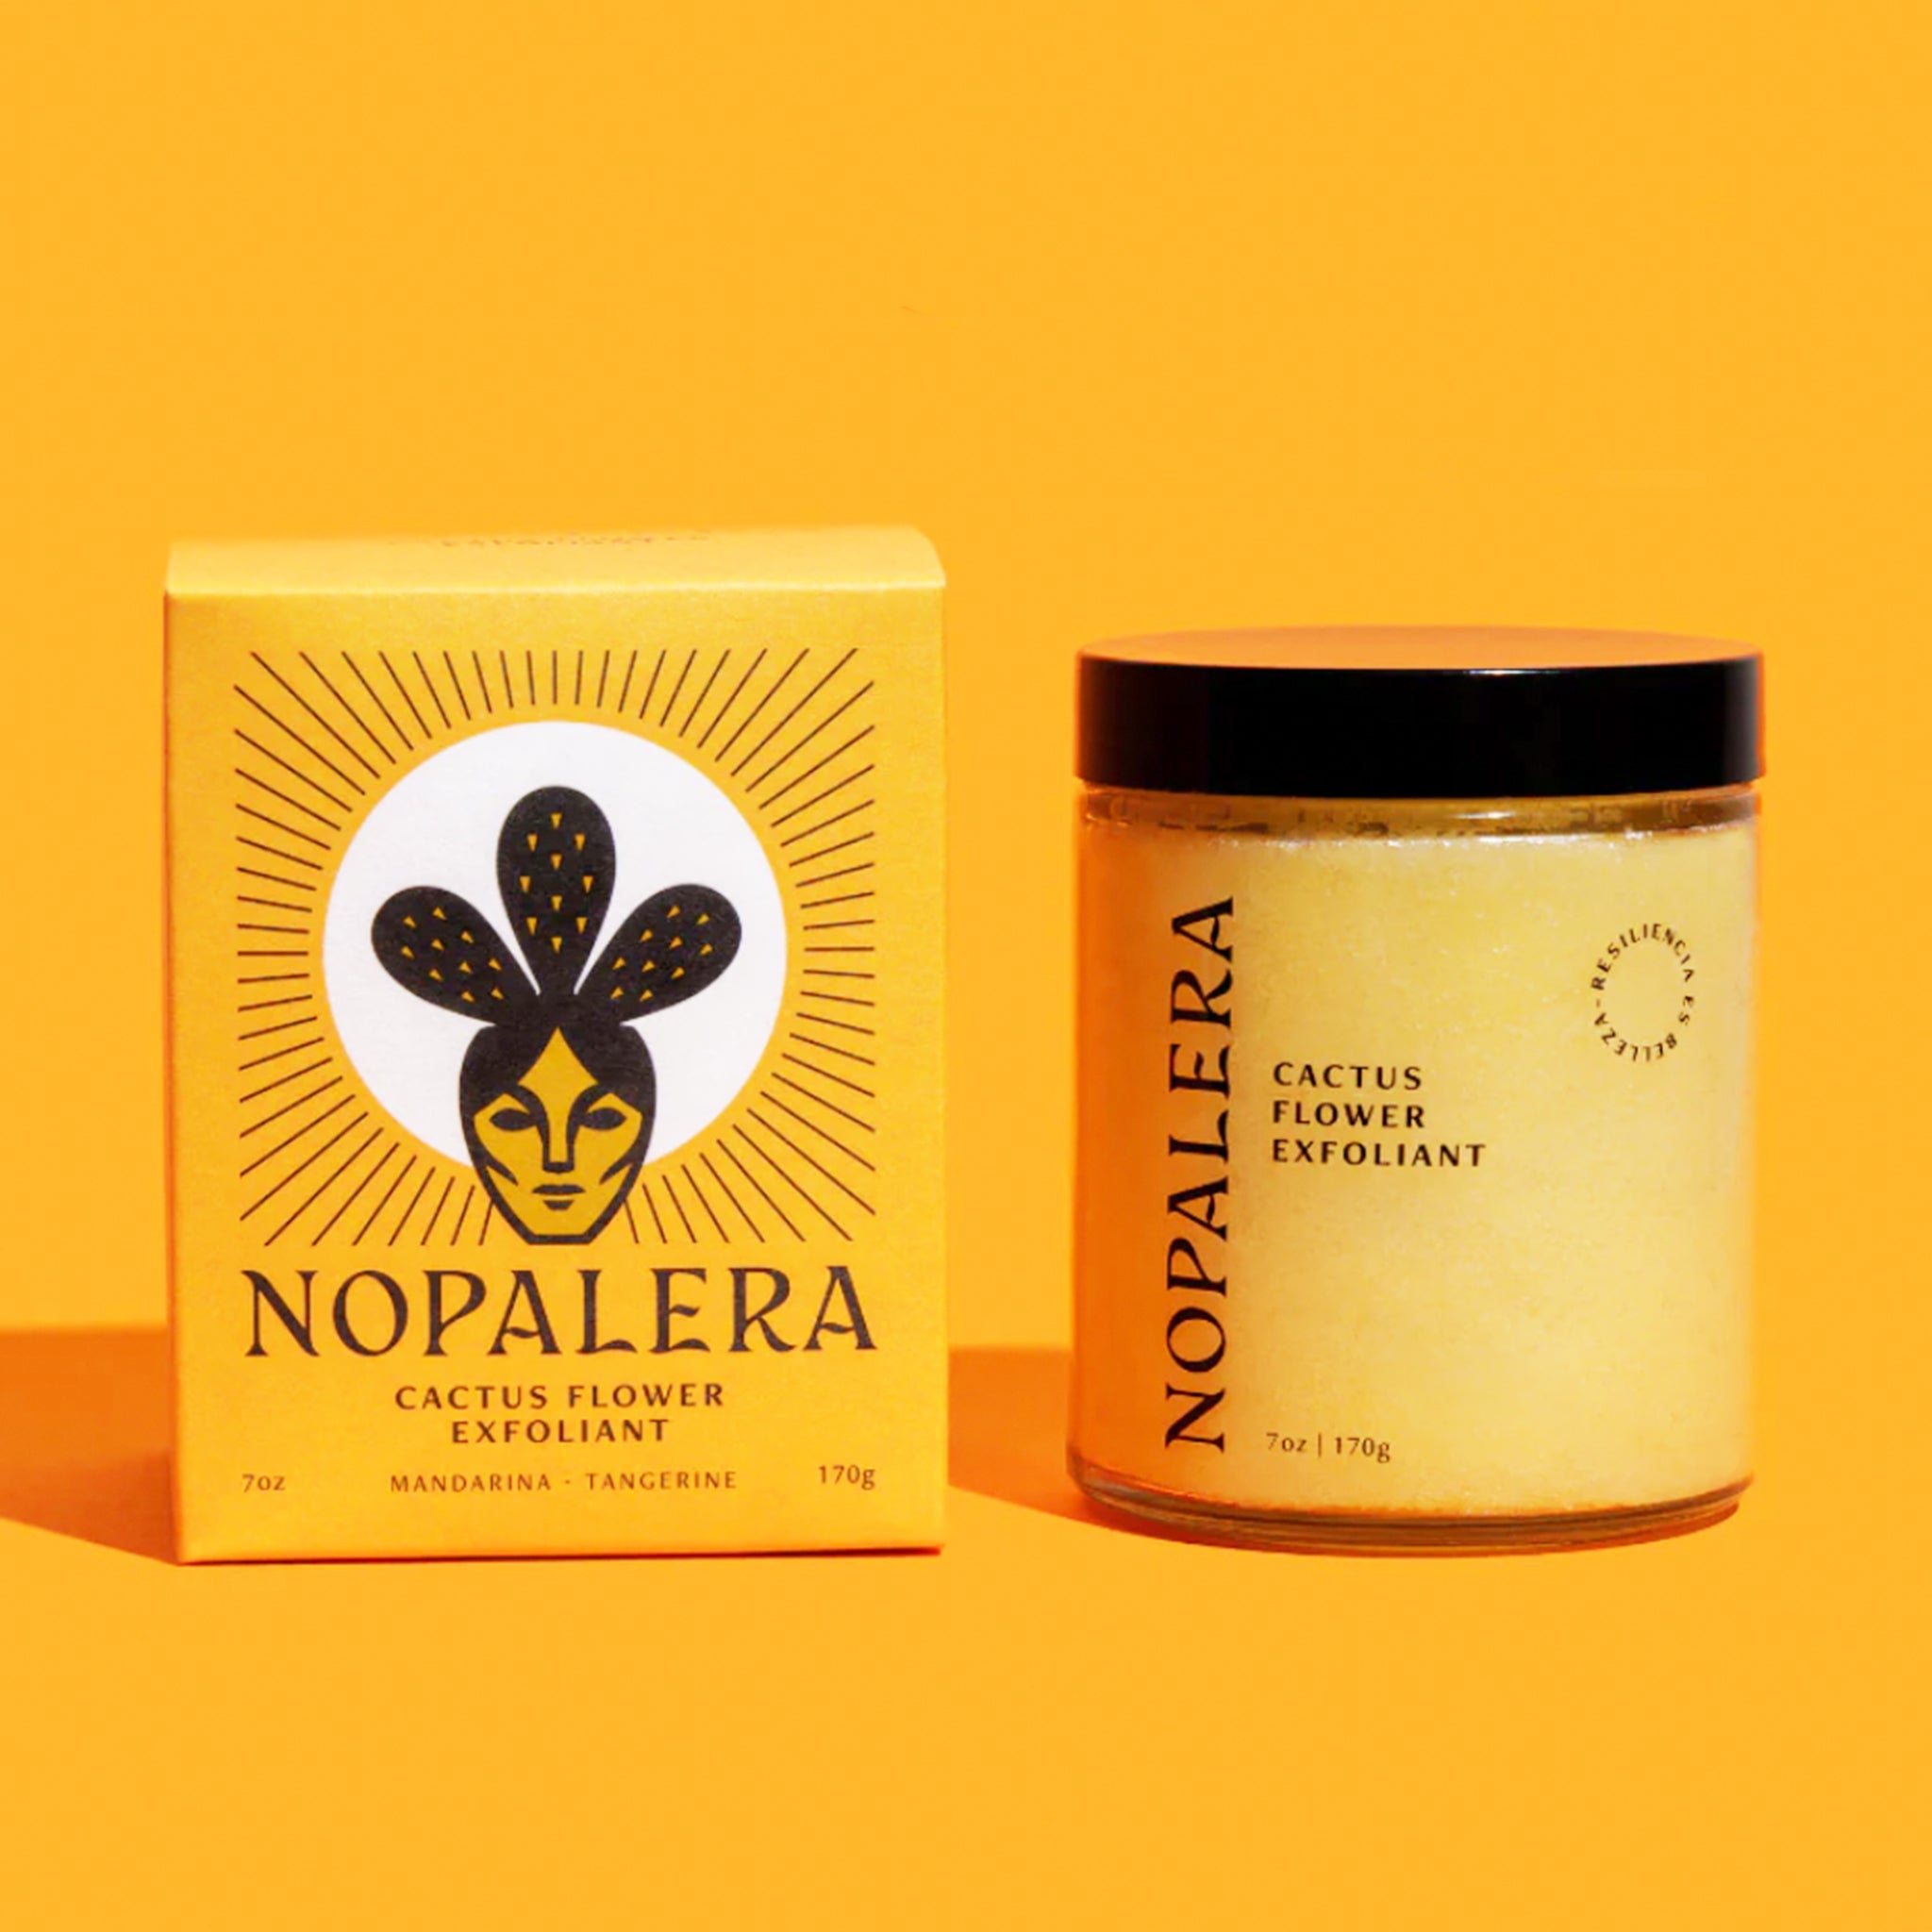 On a bright yellow background is a box with a design of a woman with cactus behind her head along with a jar of exfoliant that reads, "Nopalera Cactus Flower Exfoliant". They are both a similar shade of yellow and have a black screw on lid.